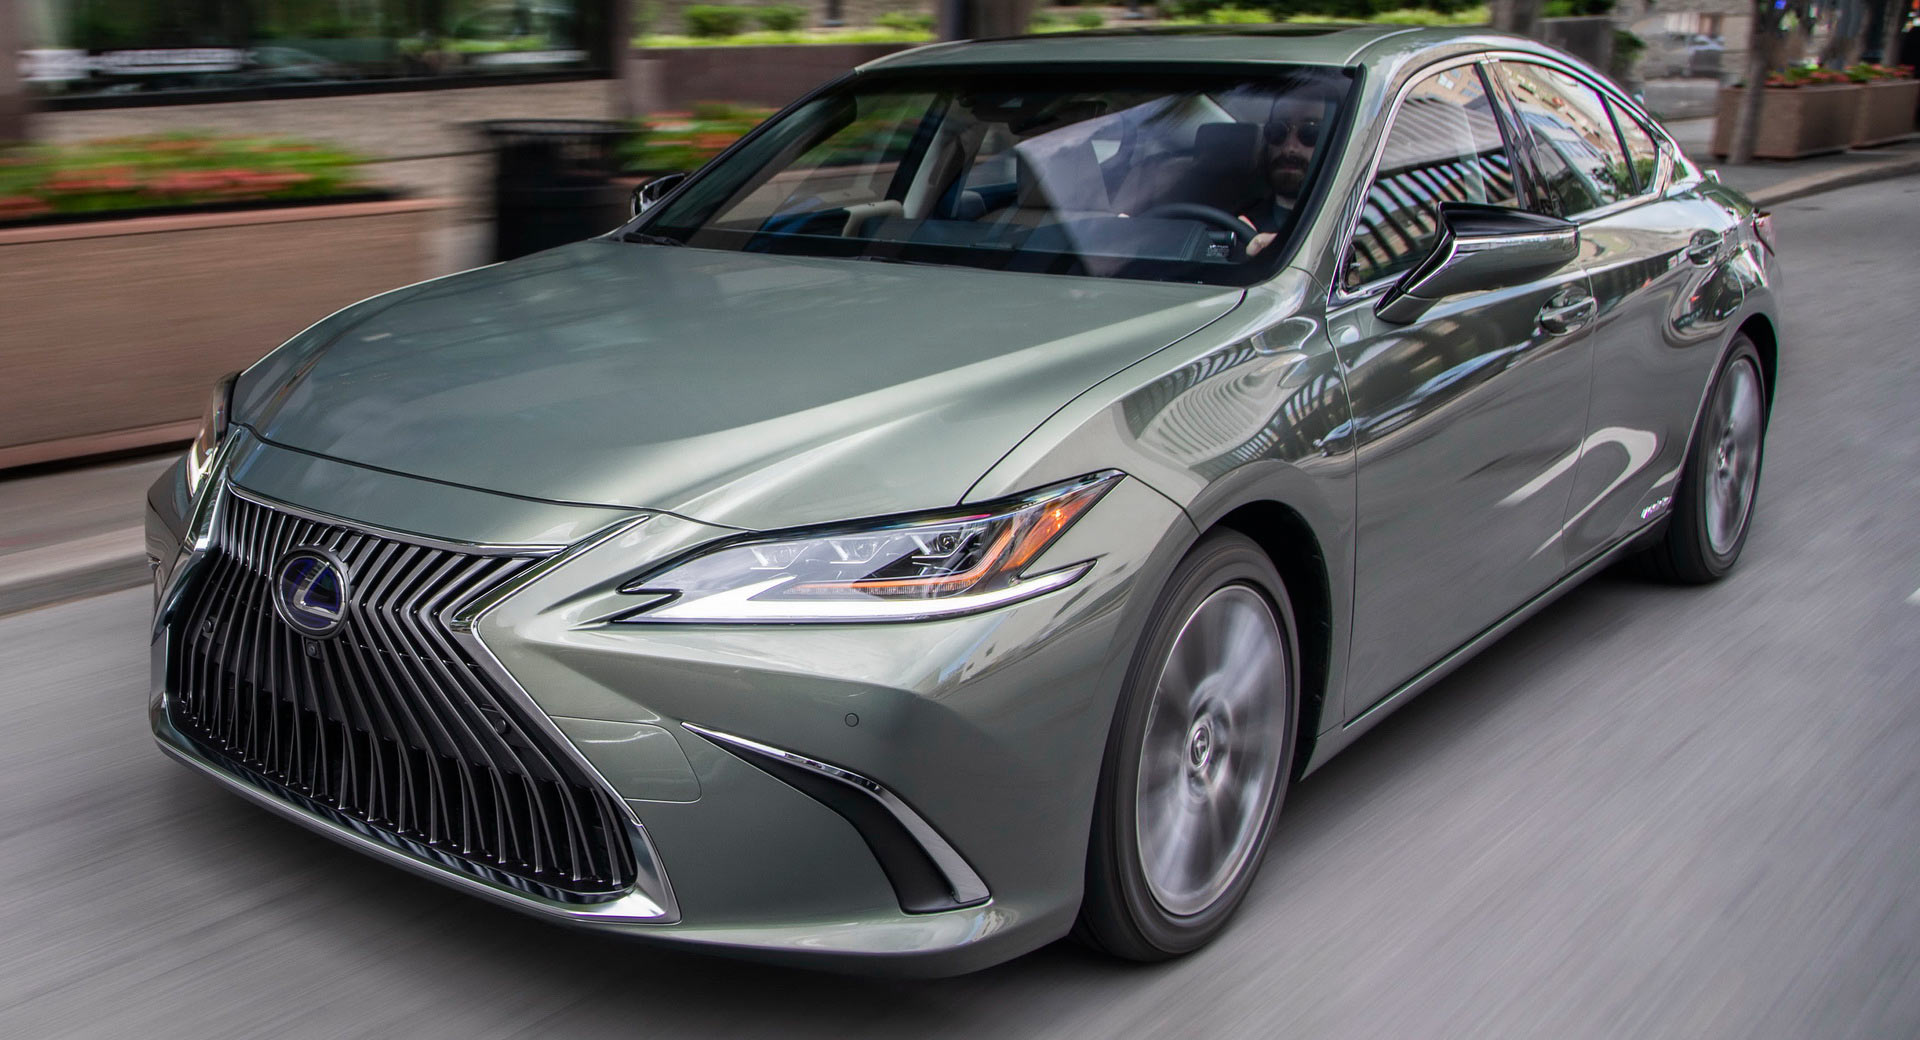 Lexus ES Priced From £ 35,150 In The UK, Orders Open This October Carscoops...